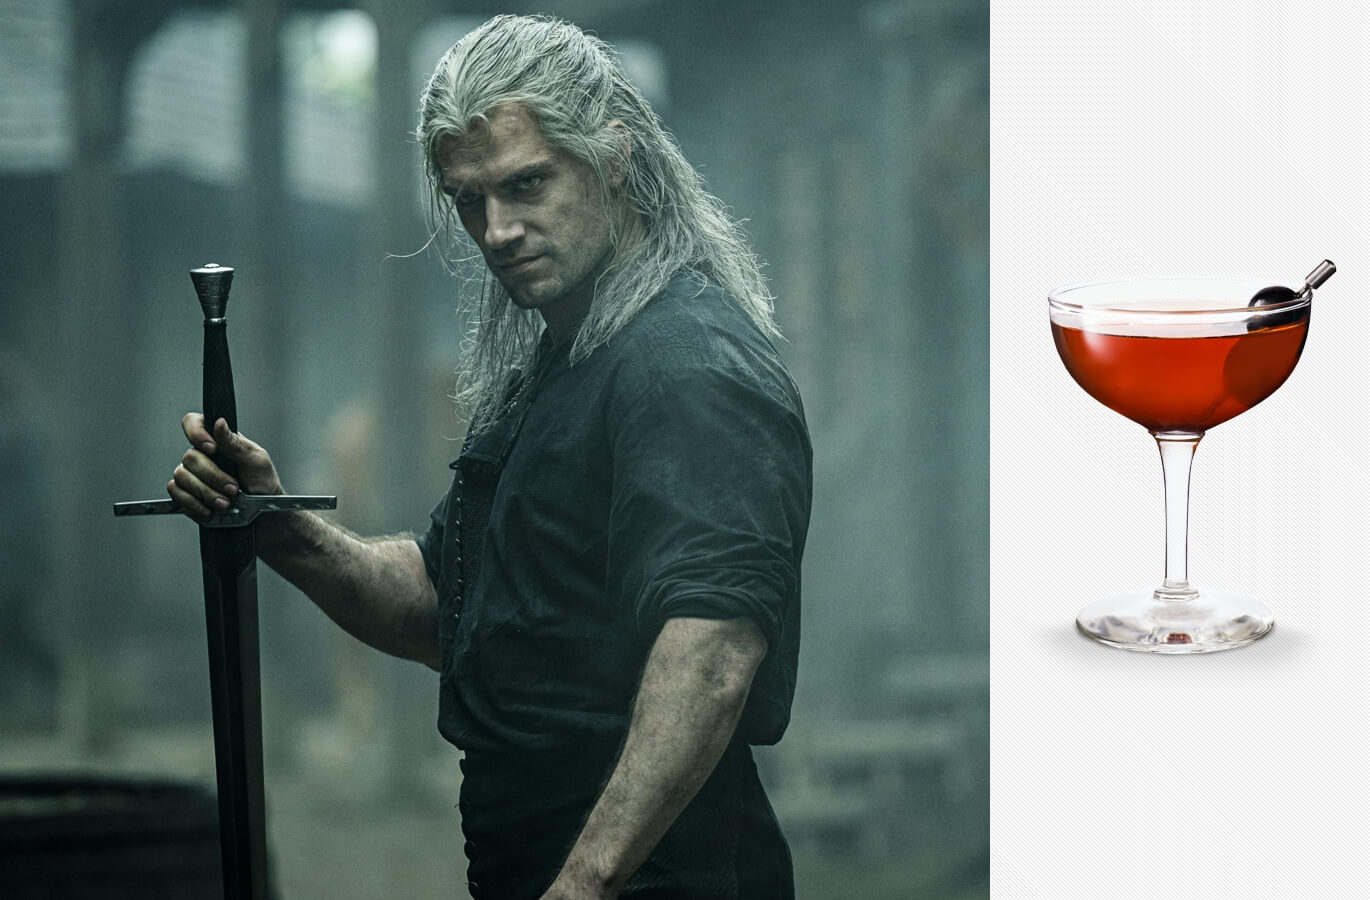 The Witcher on Netflix and a Hunter cocktail